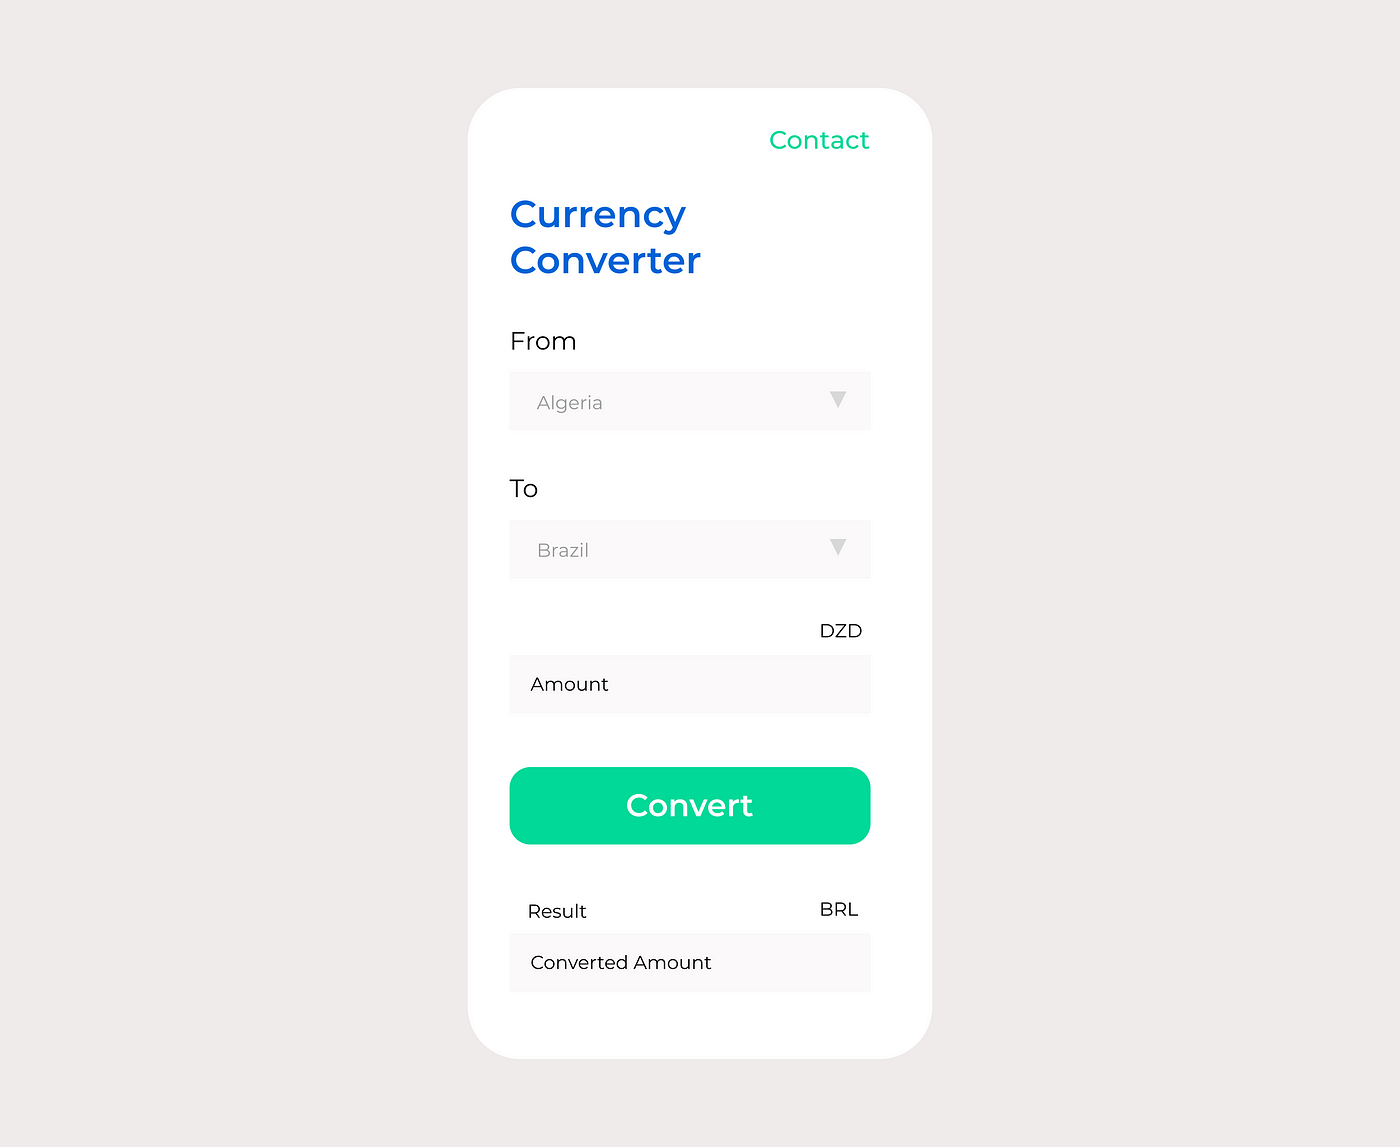 How I Built a Simple Currency Converter App — Using Recommended Android  Pattern and Architecture | by Inuwa Ibrahim | The Startup | Medium